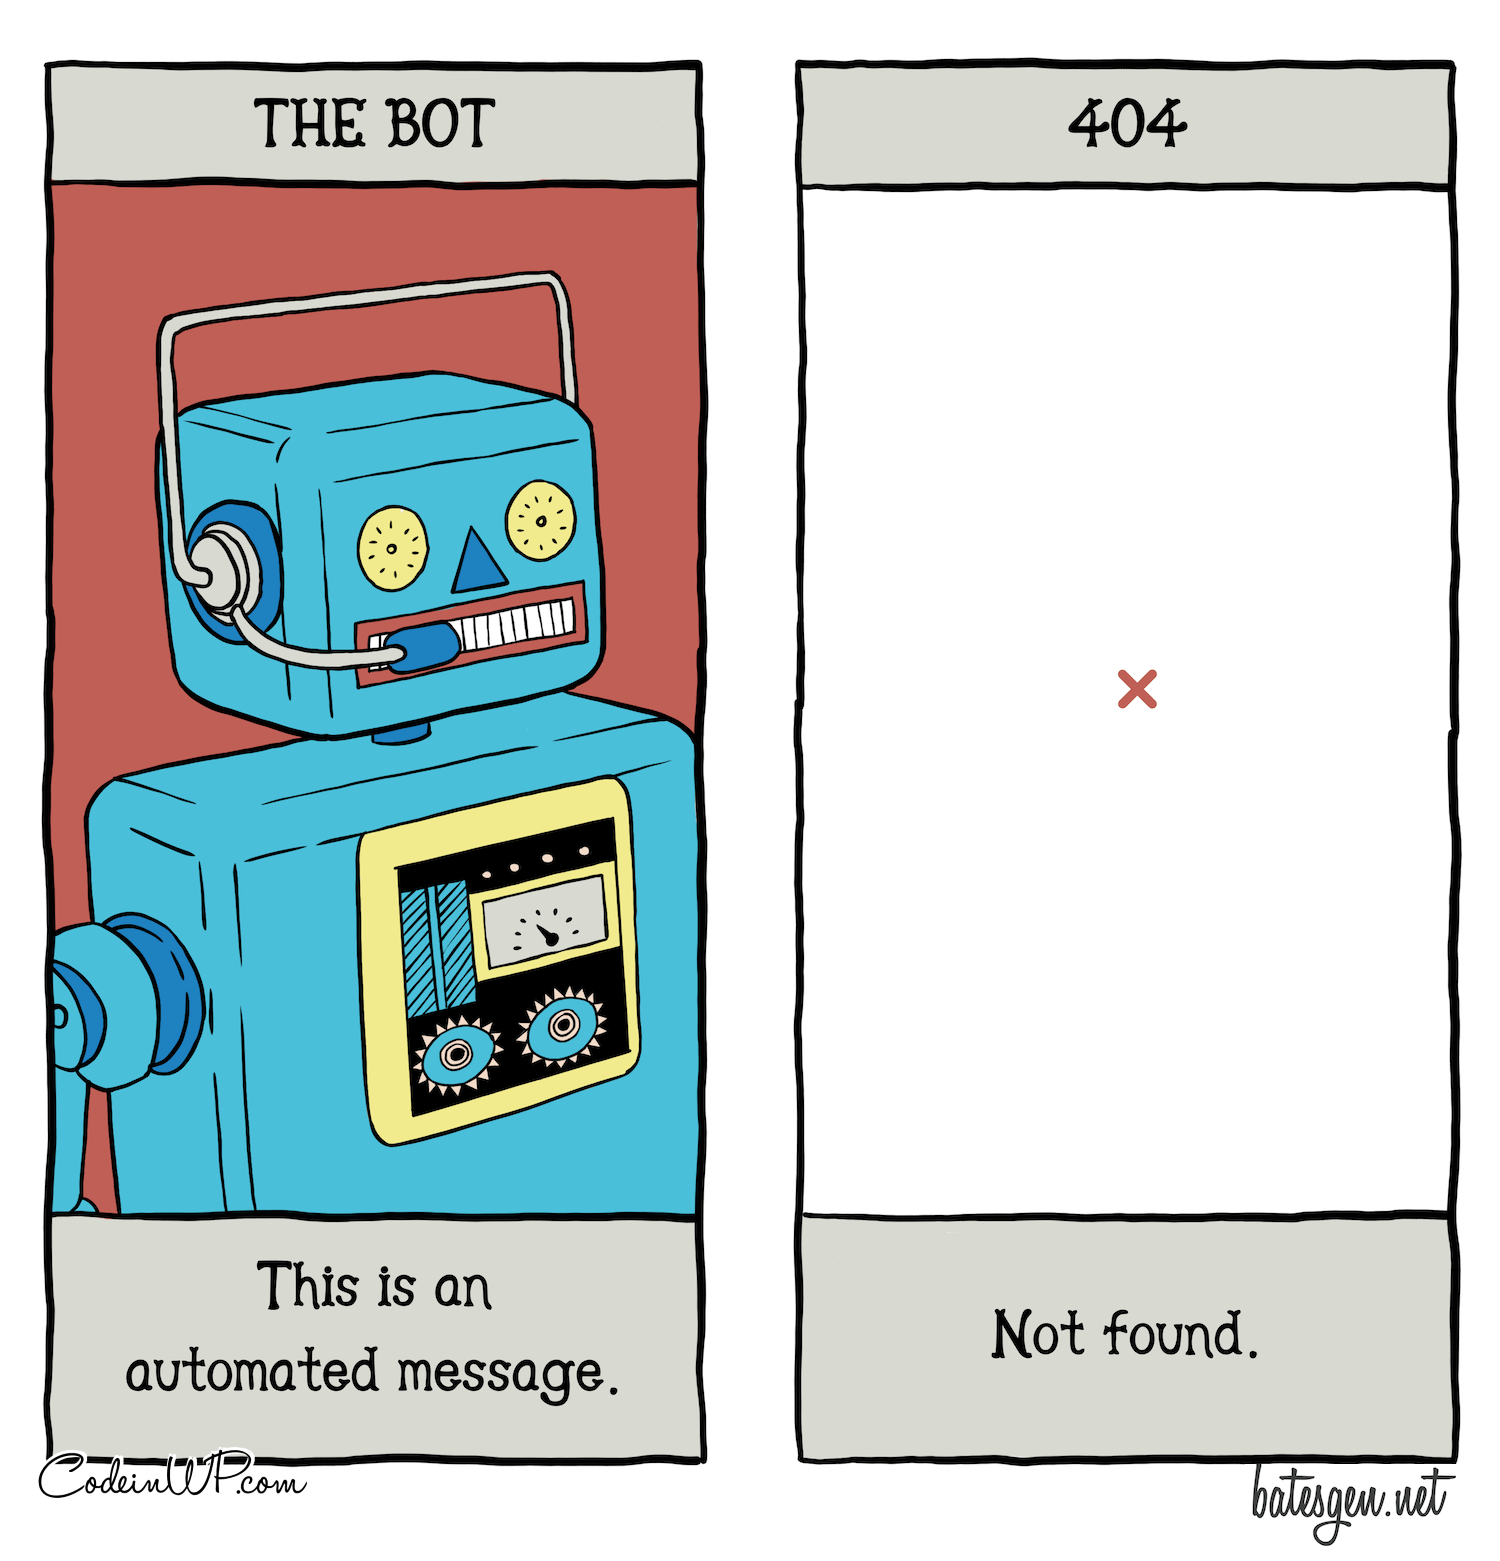 The perils of living in the digital realm: robots and 404 pages